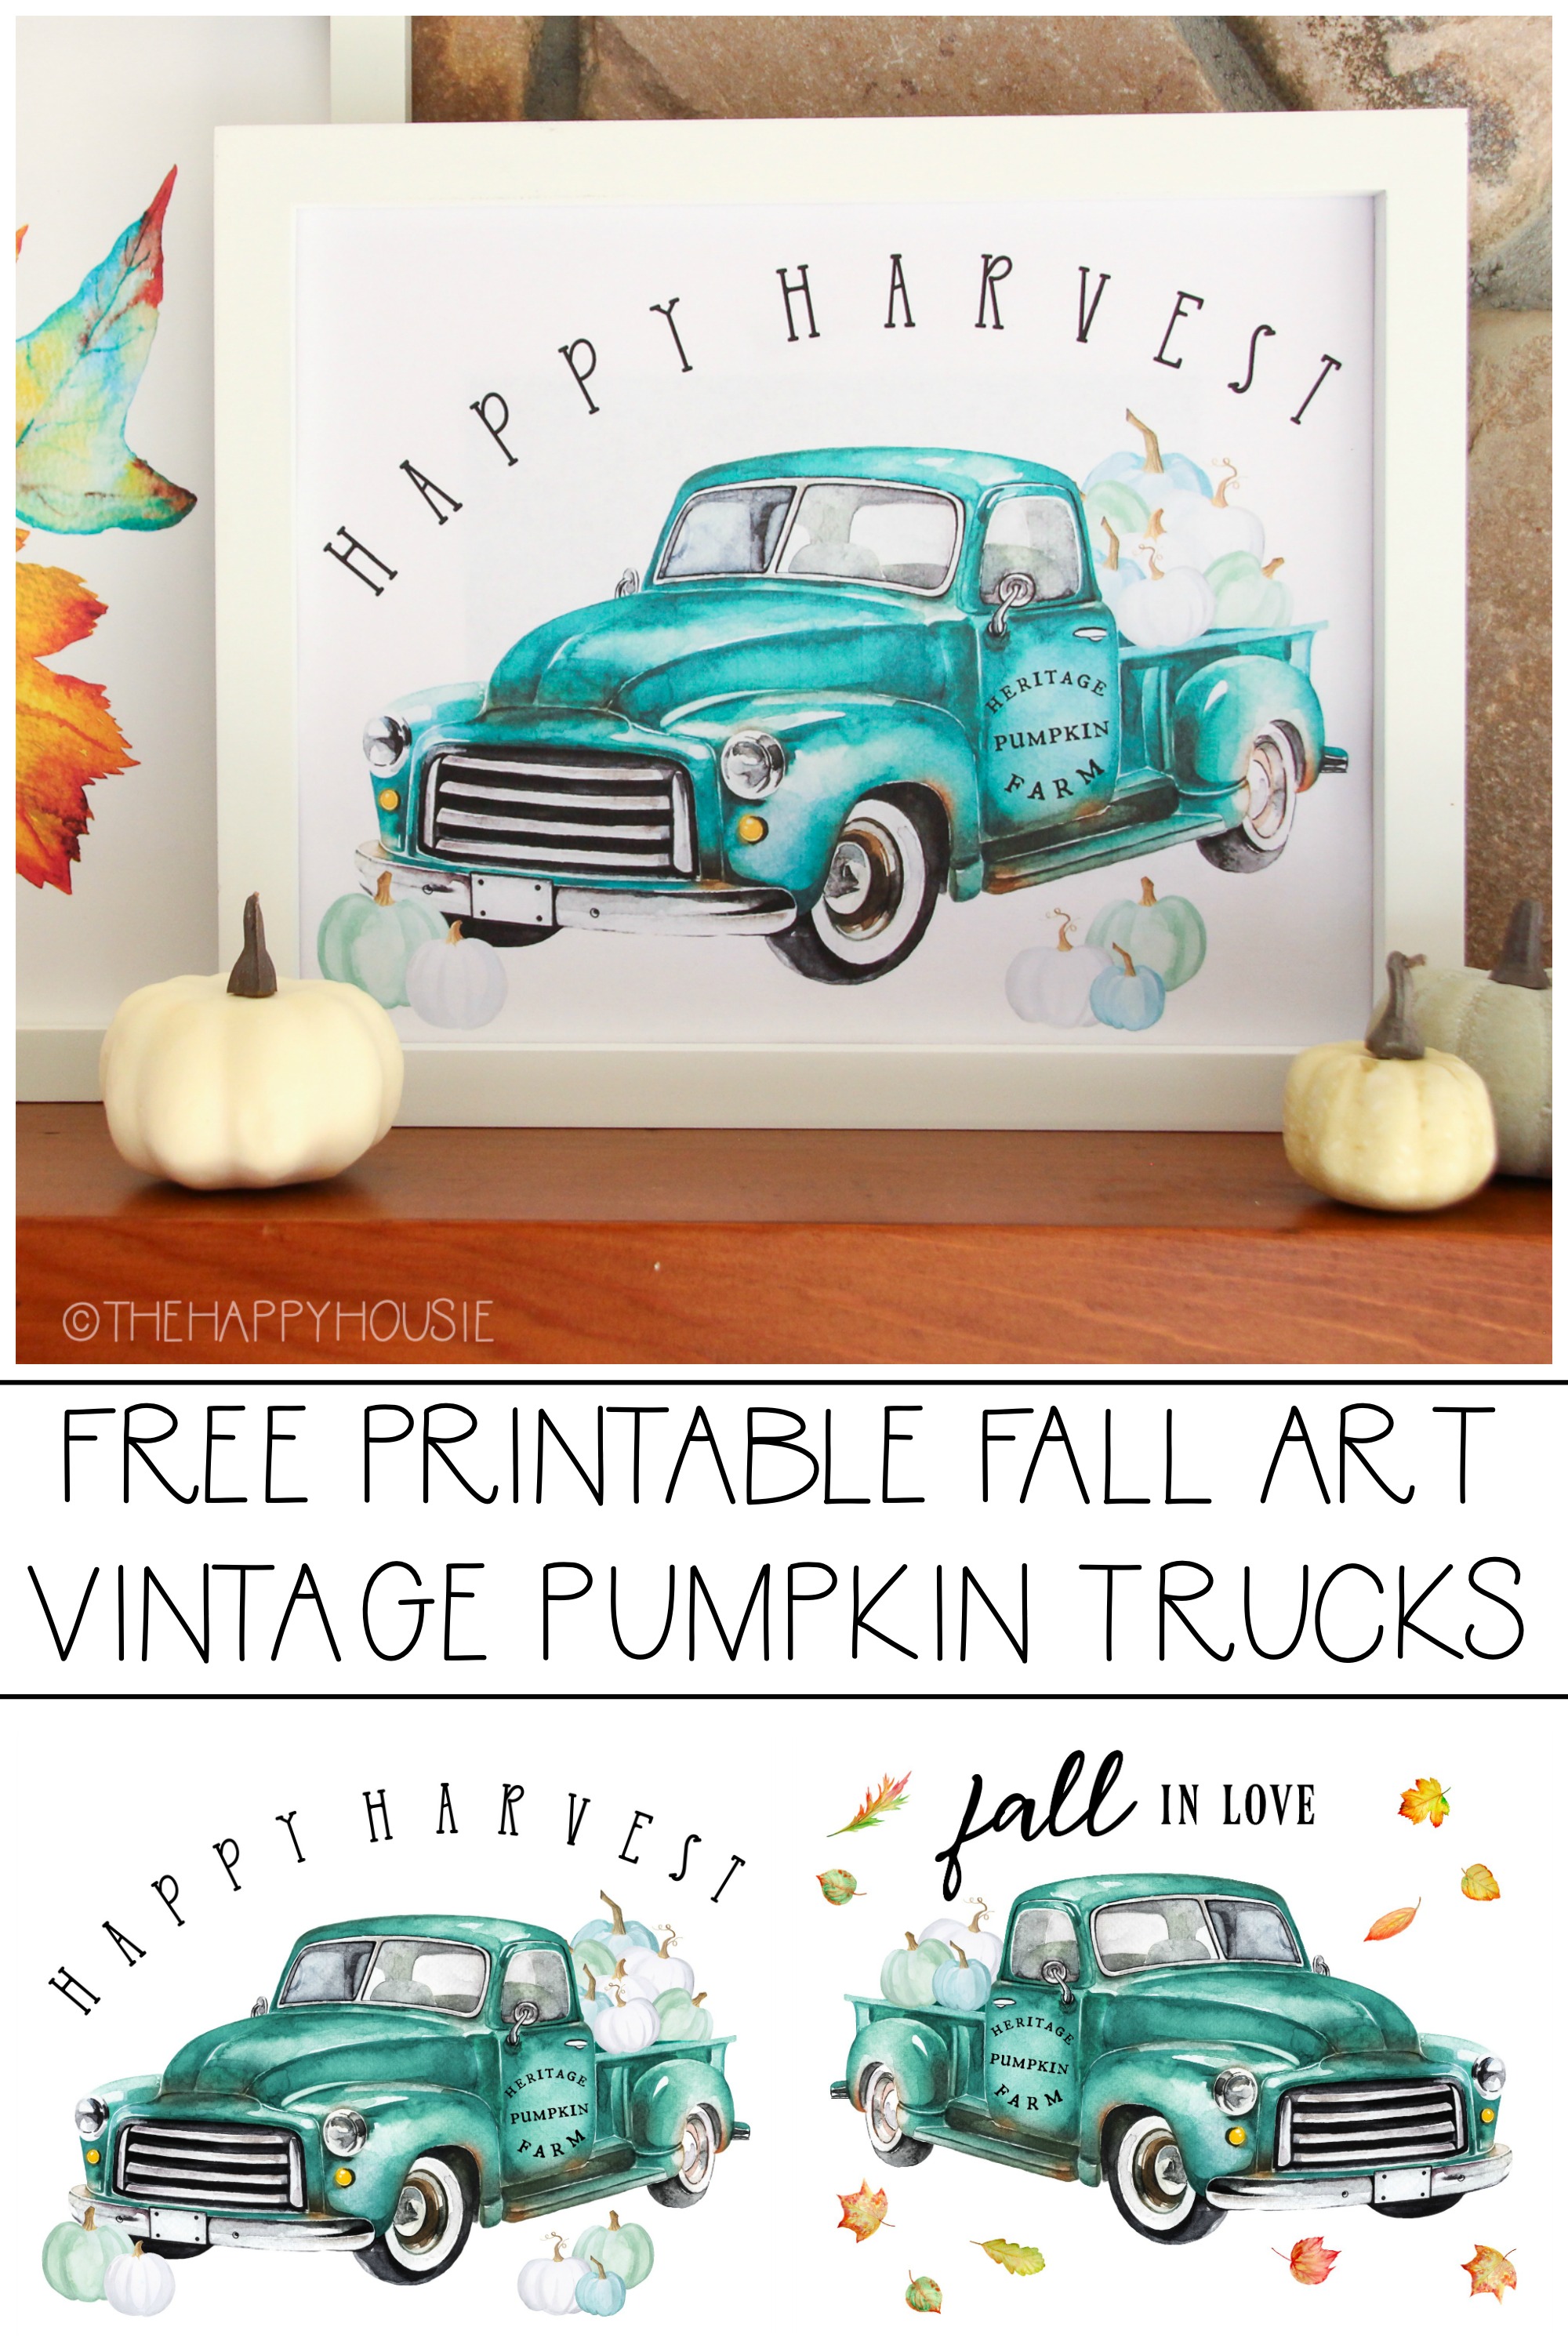 20 Pretty Free Fall Wall Art Printables- A fun and frugal way to update your home's décor for fall is with free printables! This set even includes Thanksgiving and Halloween free printables, too! | #fall #Halloween #Thanksgiving #freePrintables #ACultivatedNest